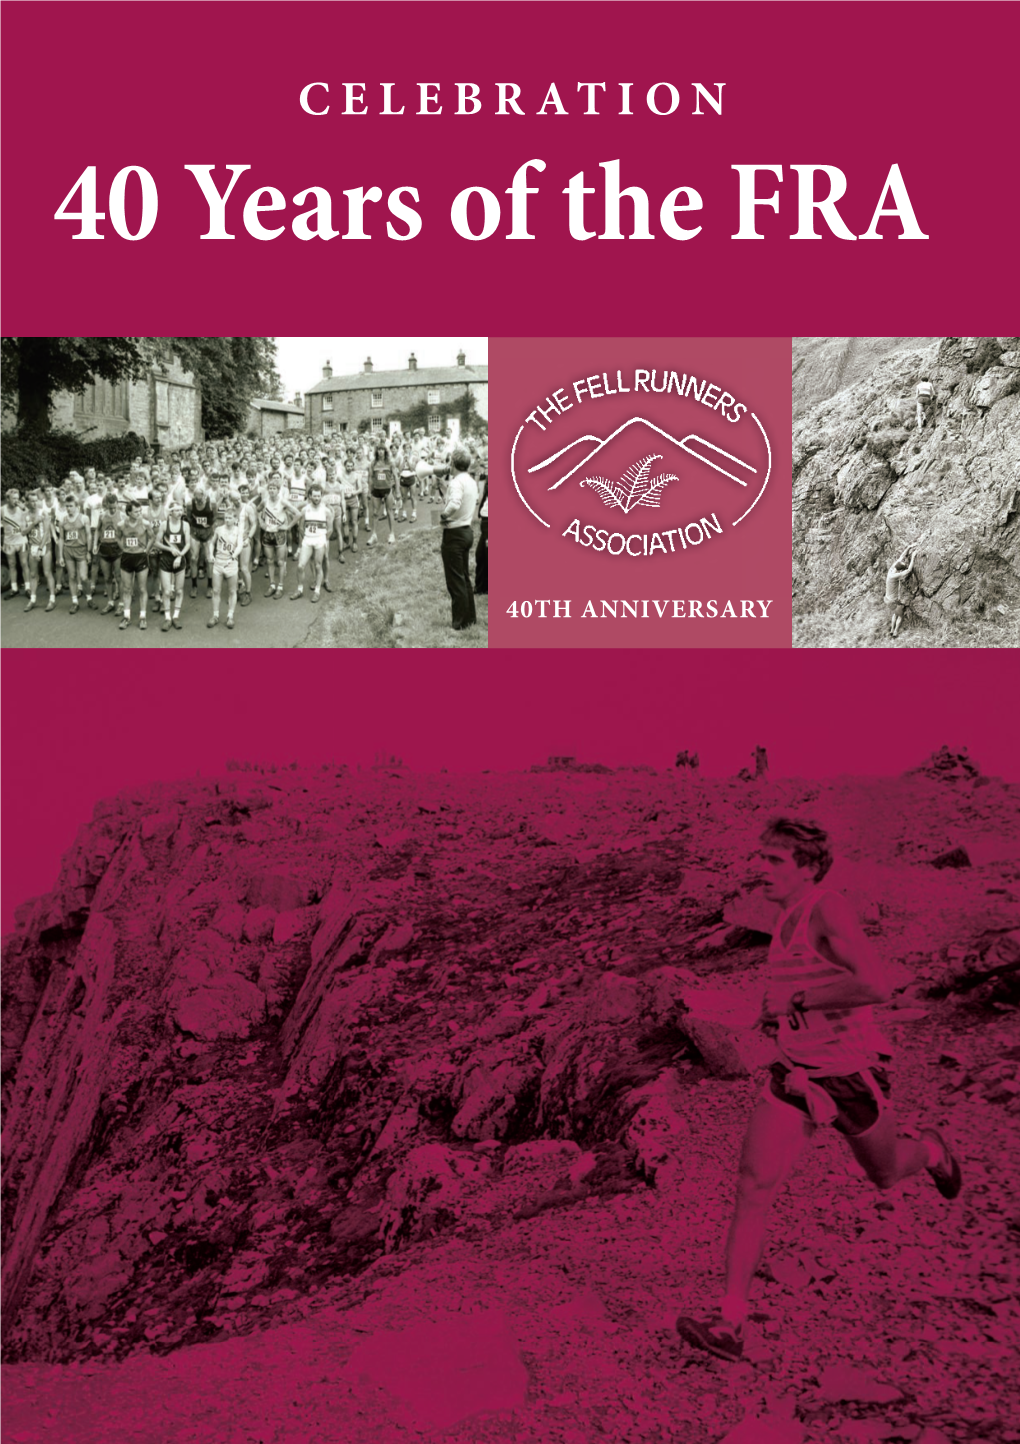 40 Years of the FRA